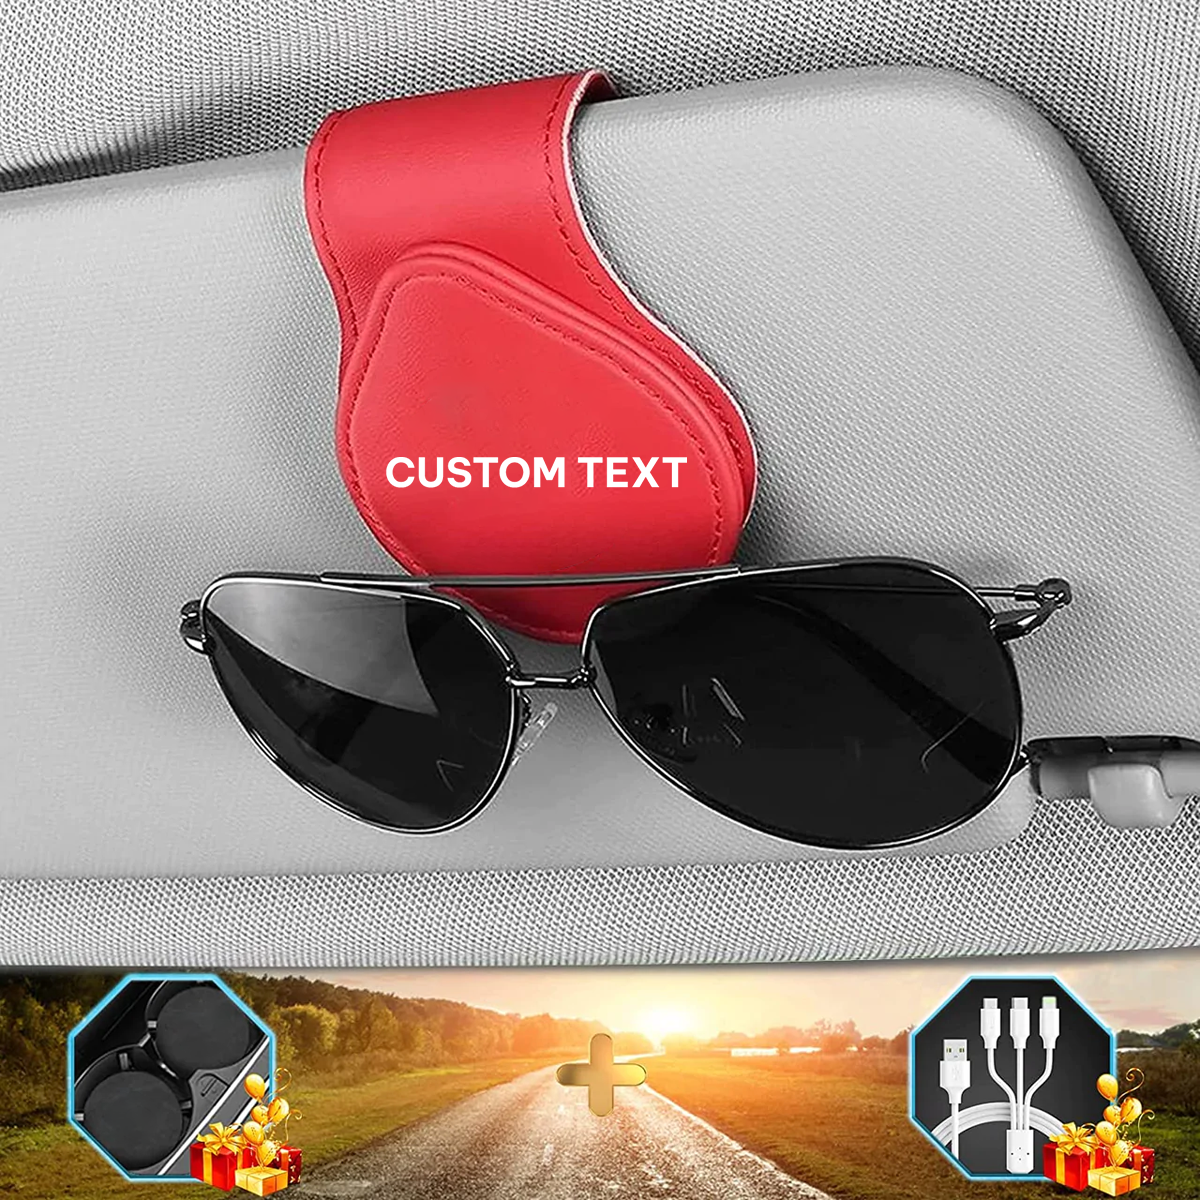 Custom Text and Logo Sunglasses Holder for Car Visor Clips, Fit with MG, Leather Magnet Adsorption Visor Accessories Car Organizer for Storing Glasses Tickets Eyeglasses Hanger - Delicate Leather